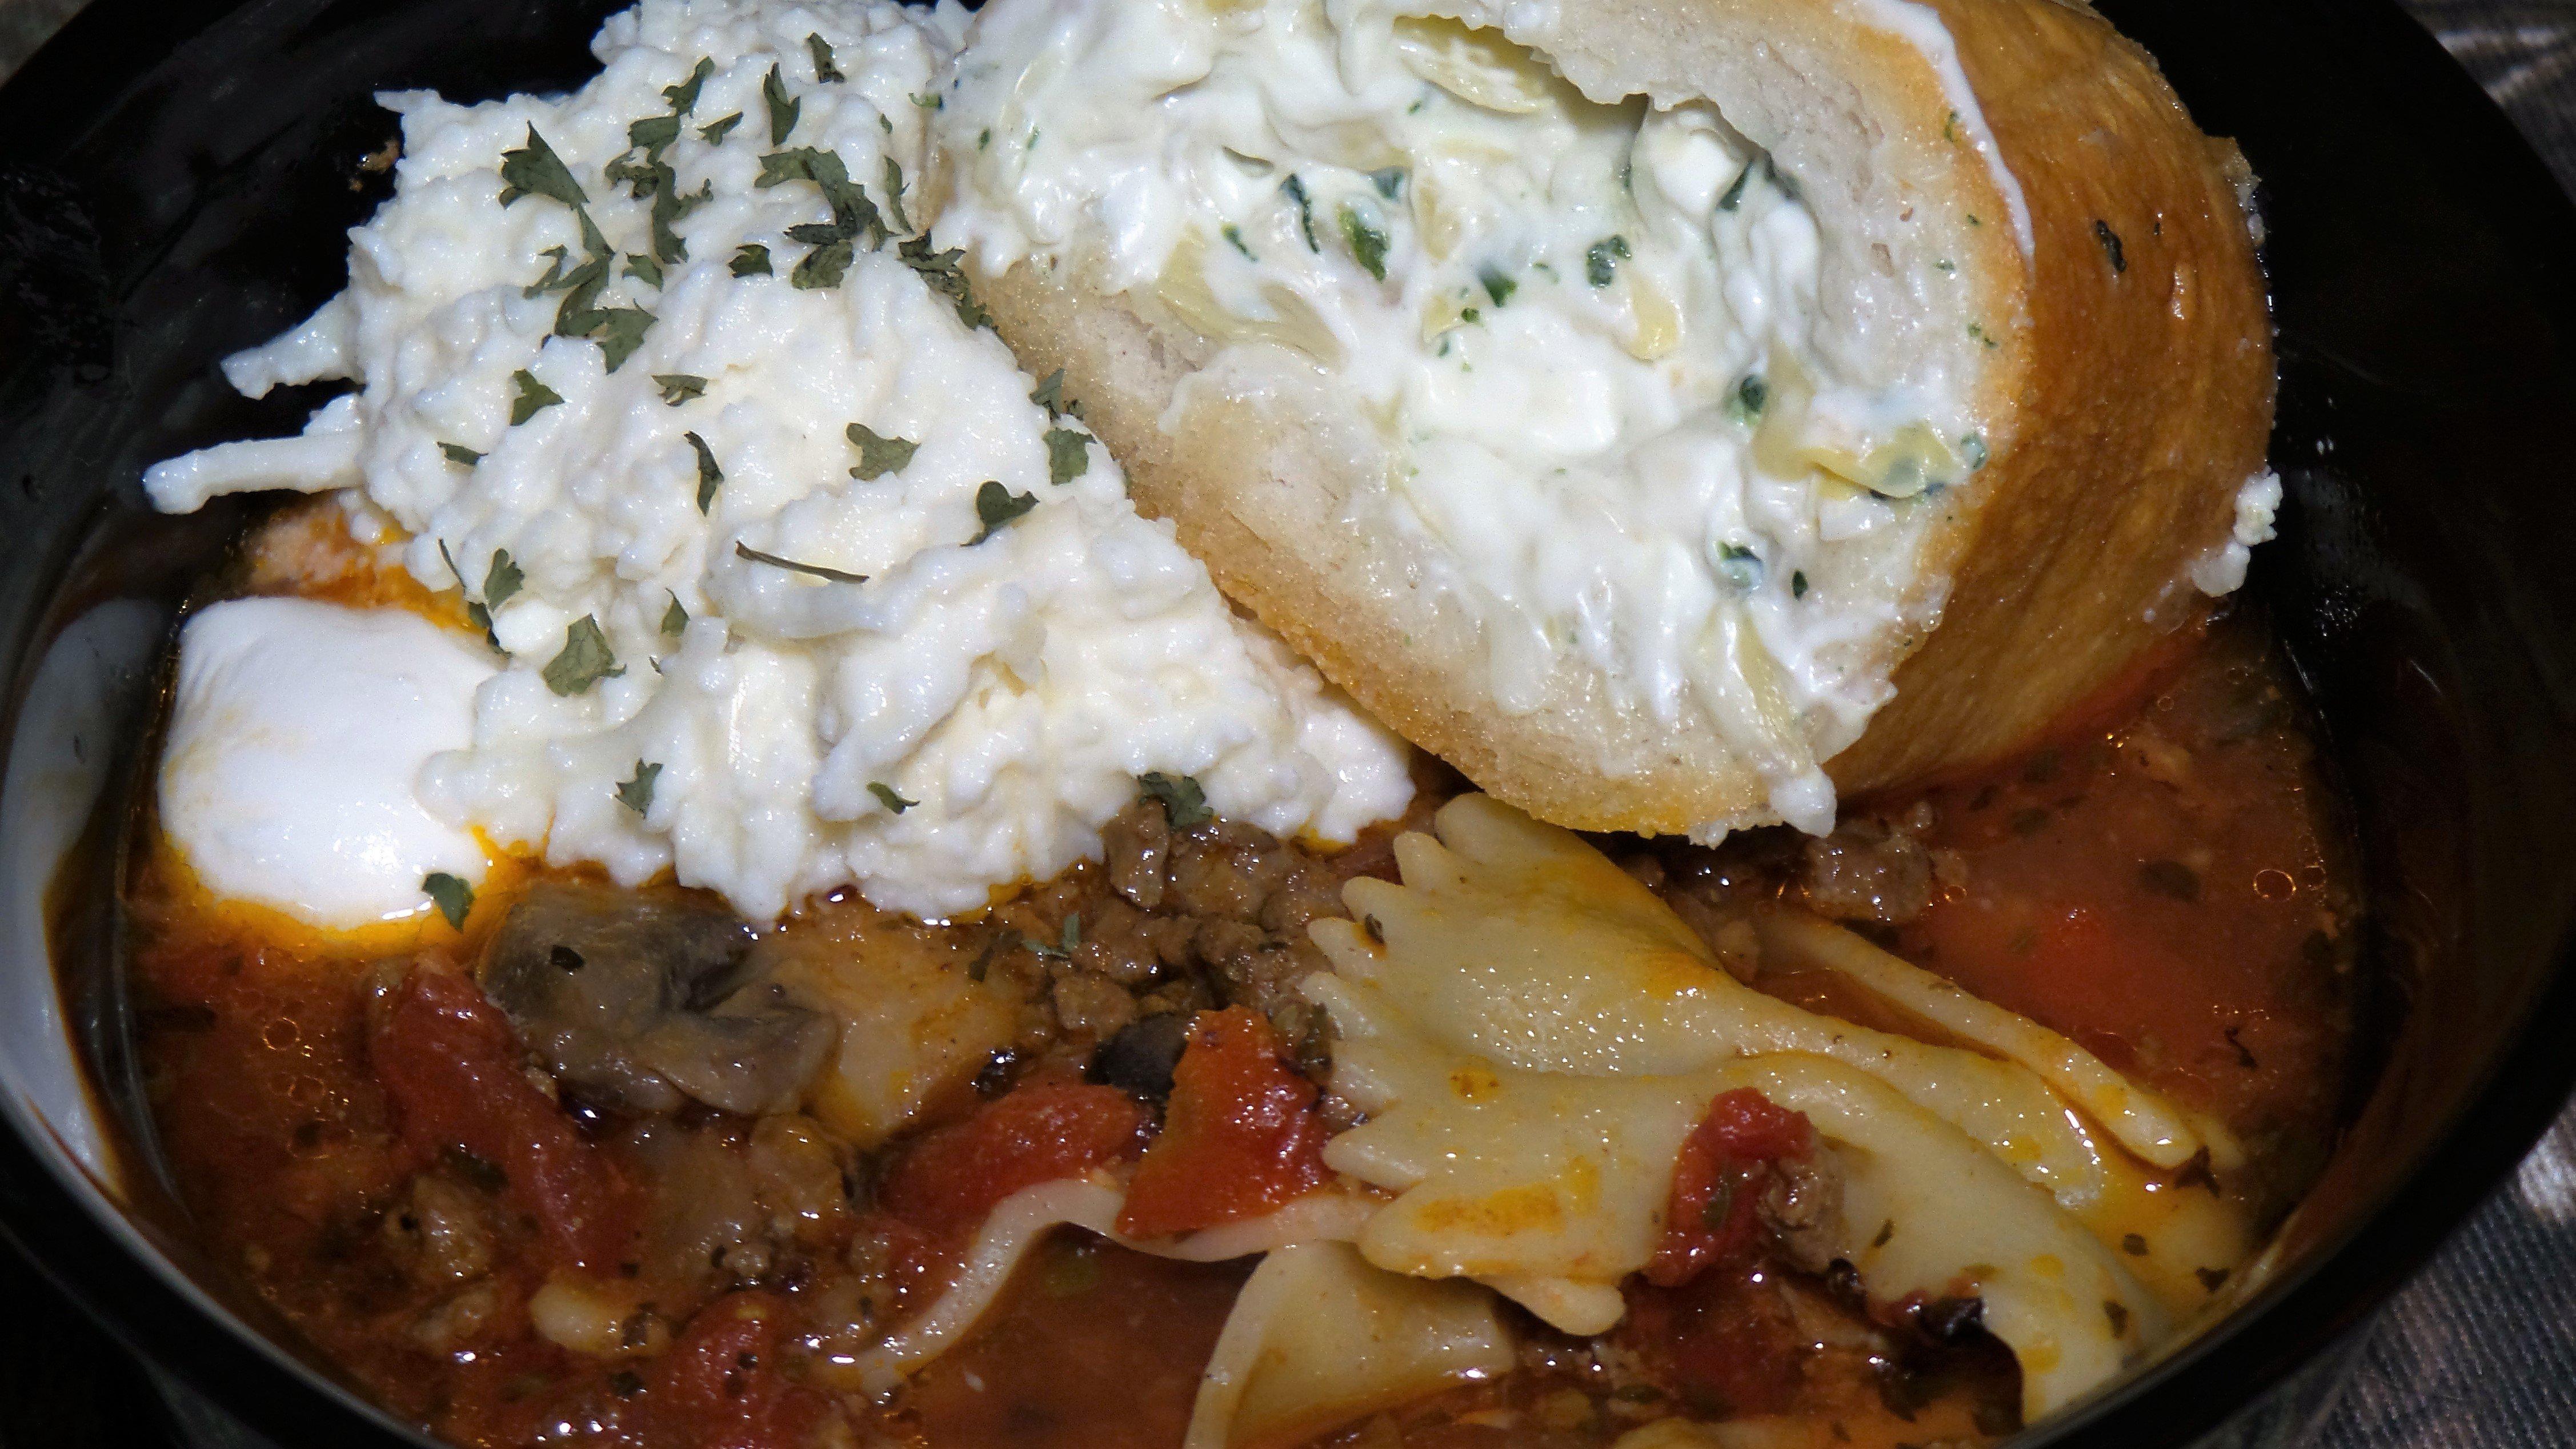 Lasagna soup hits the spot on a cold day.